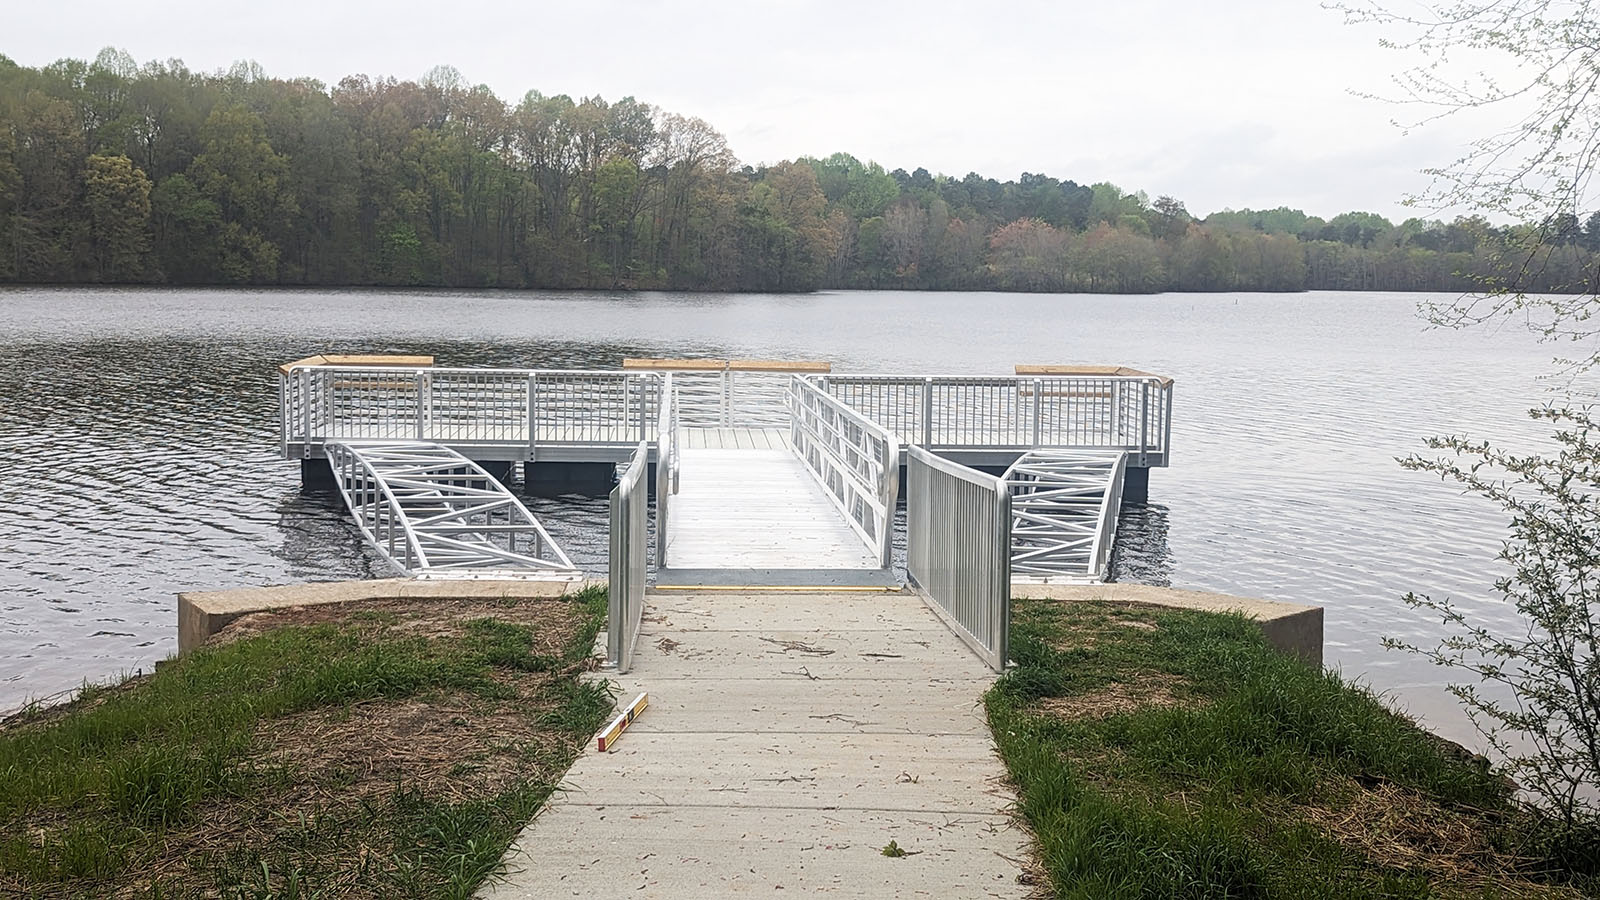 A photo of a large, aluminum pier structure at the edge of a lake.